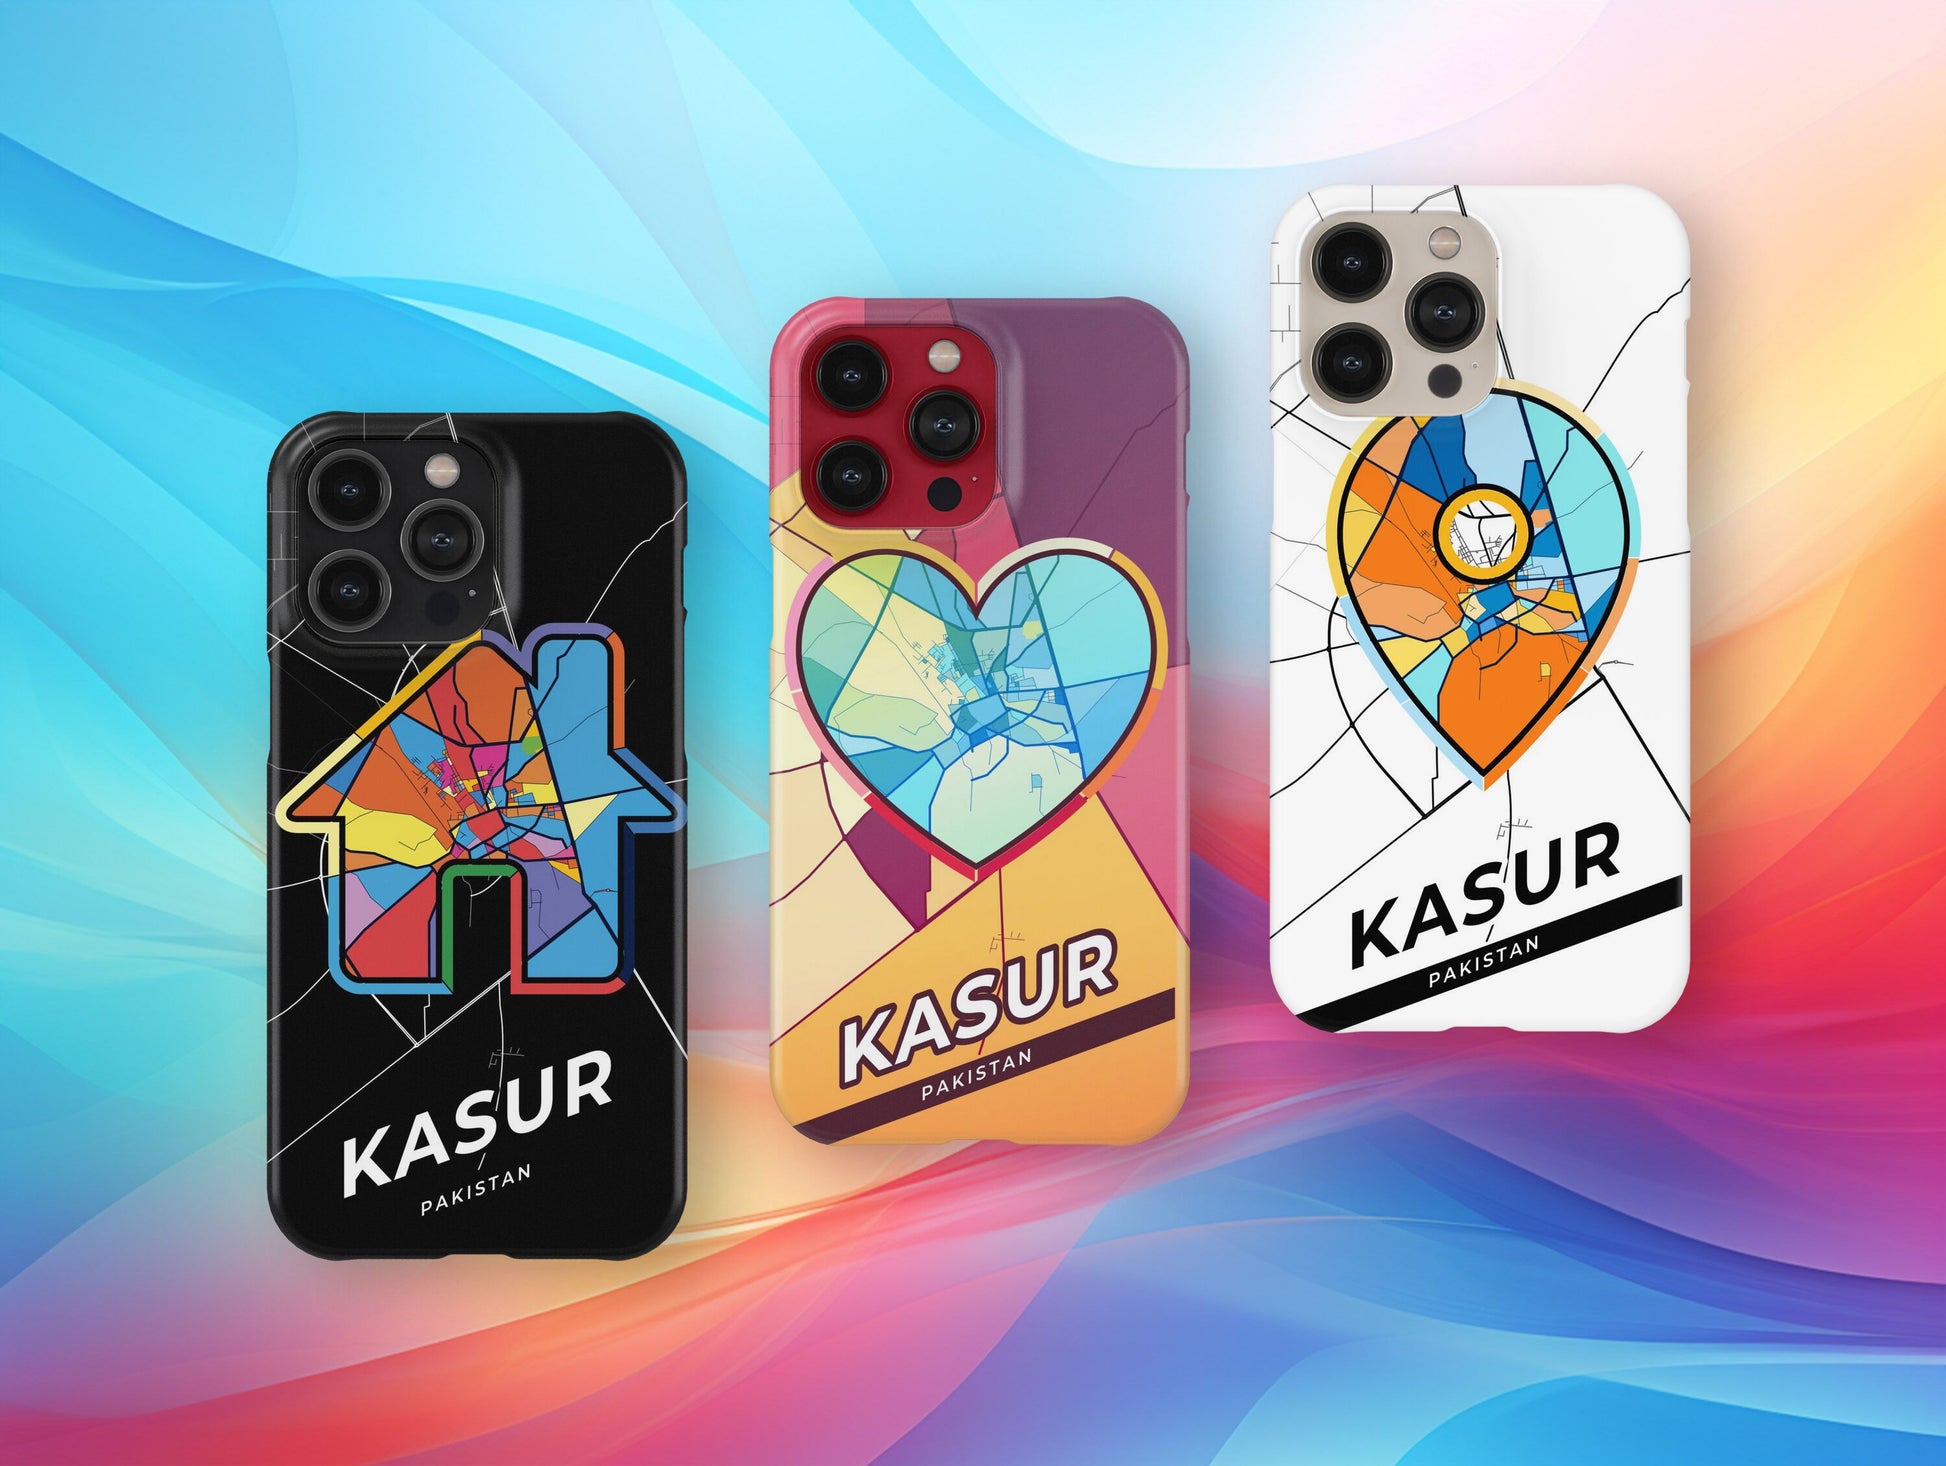 Kasur Pakistan slim phone case with colorful icon. Birthday, wedding or housewarming gift. Couple match cases.